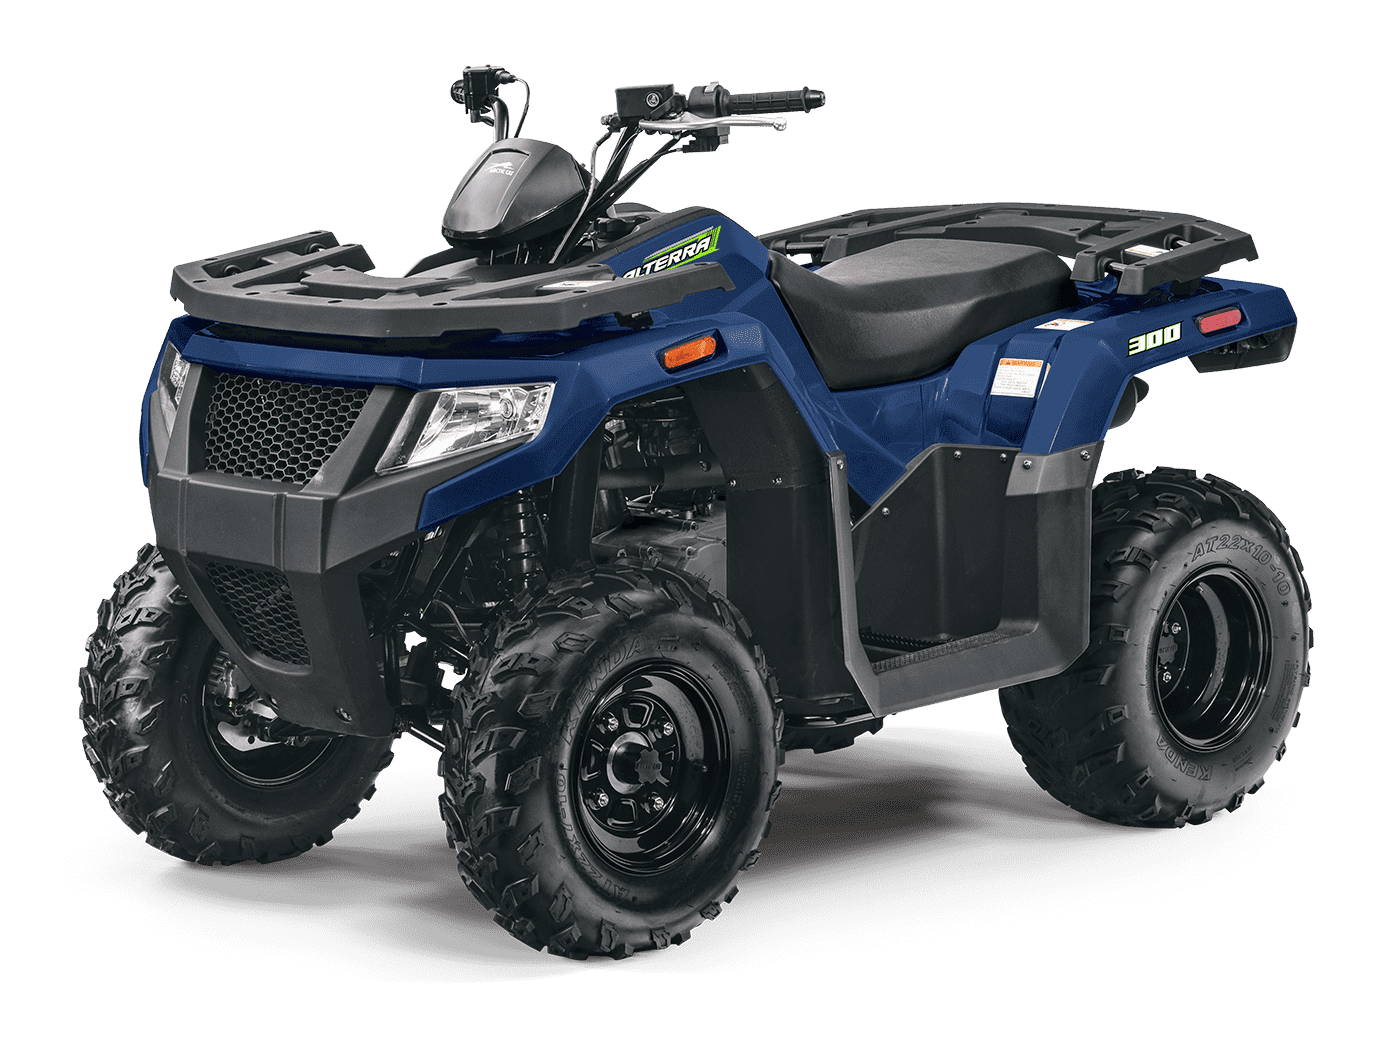 The Arctic Cat Alterra 300 in blue posing for a press photo against a white backdrop